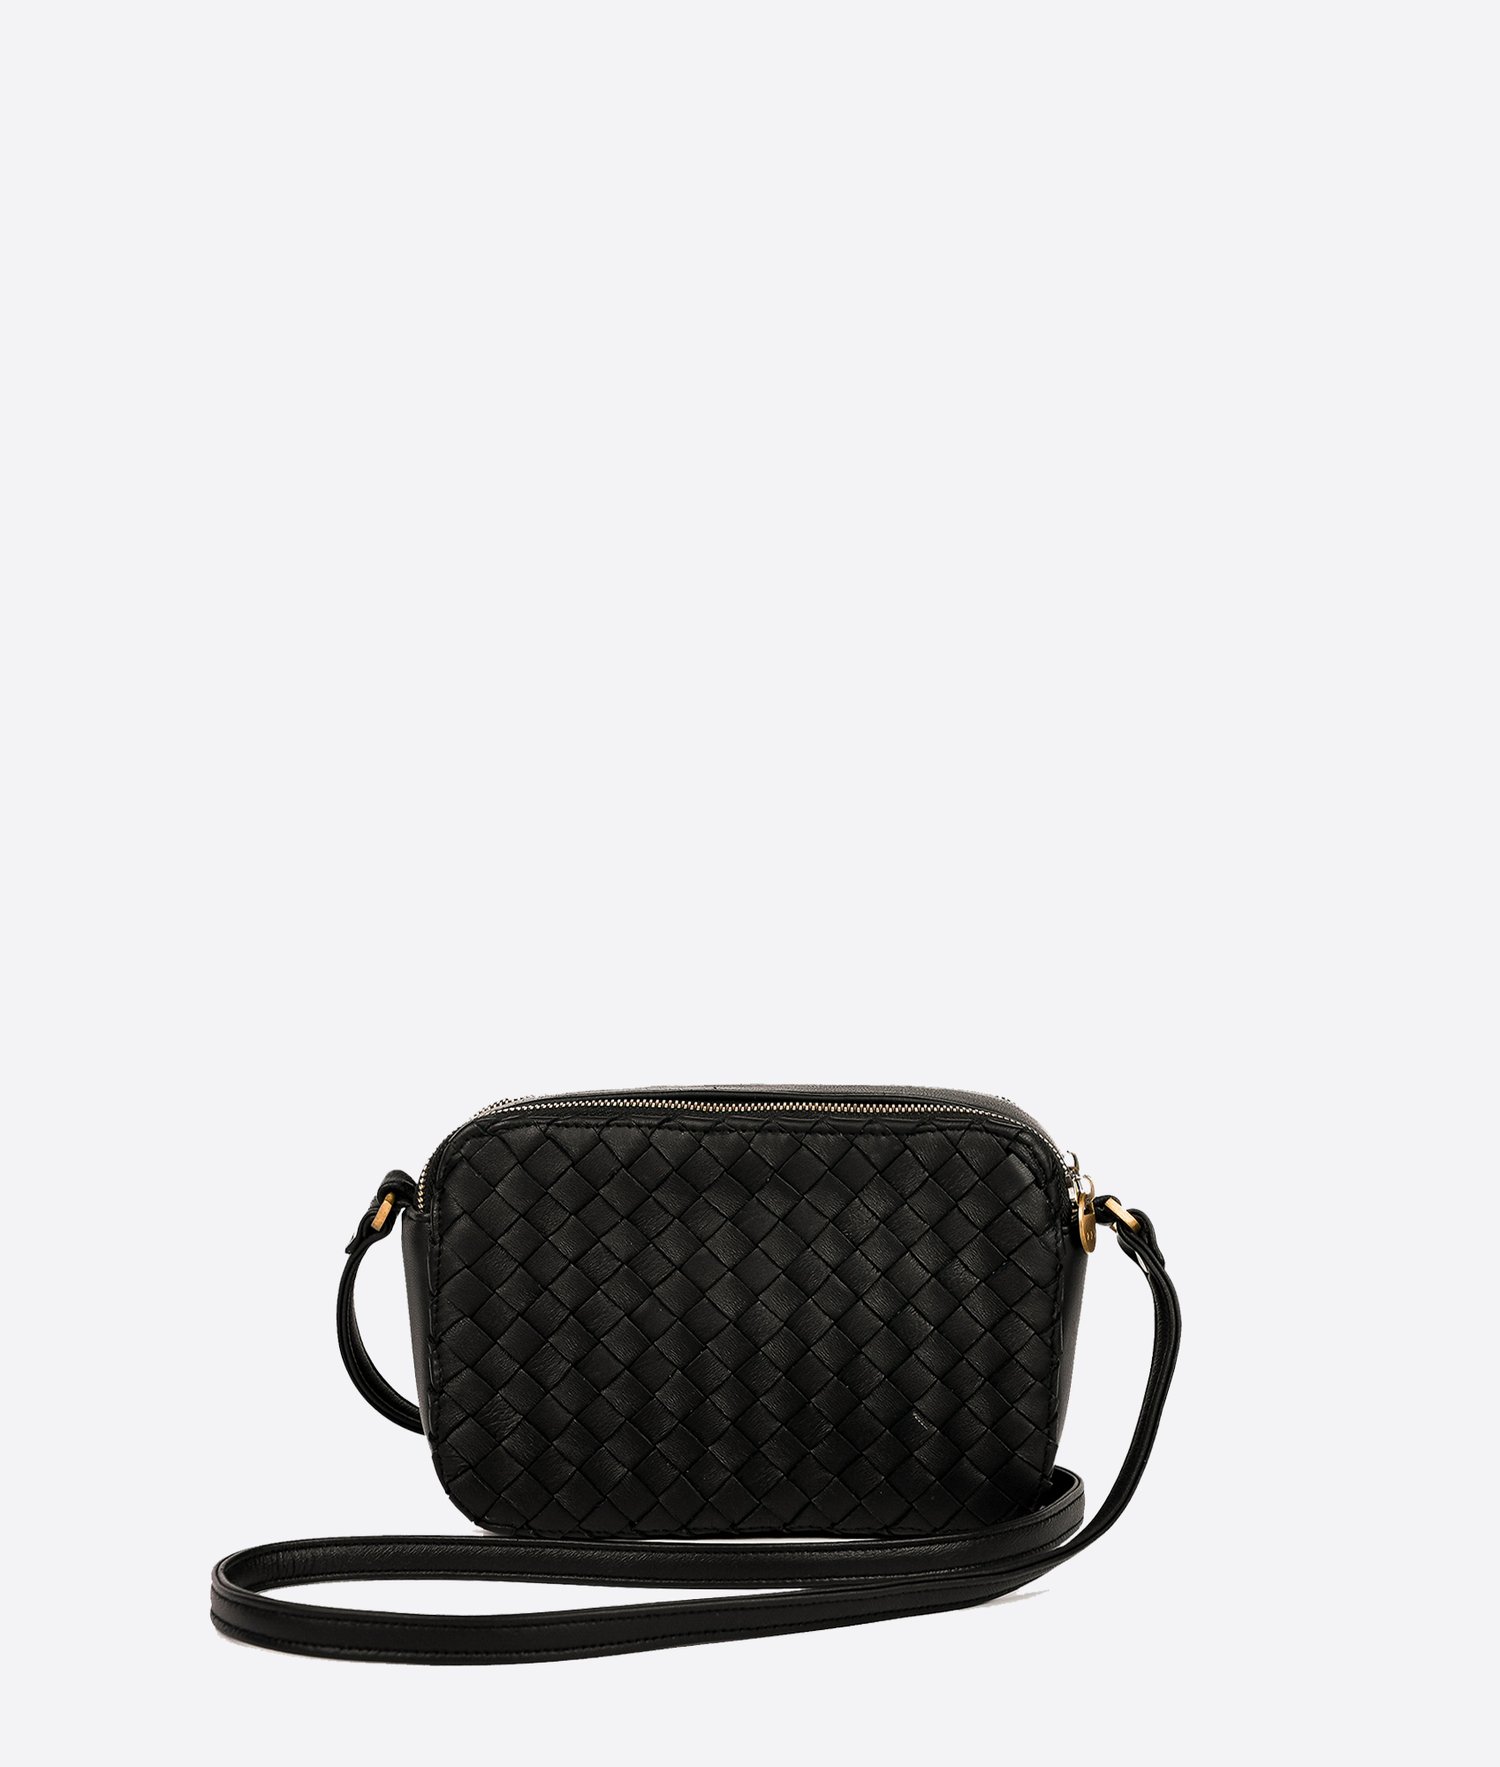 Hand-woven cross-body leather bag in black — Kmana